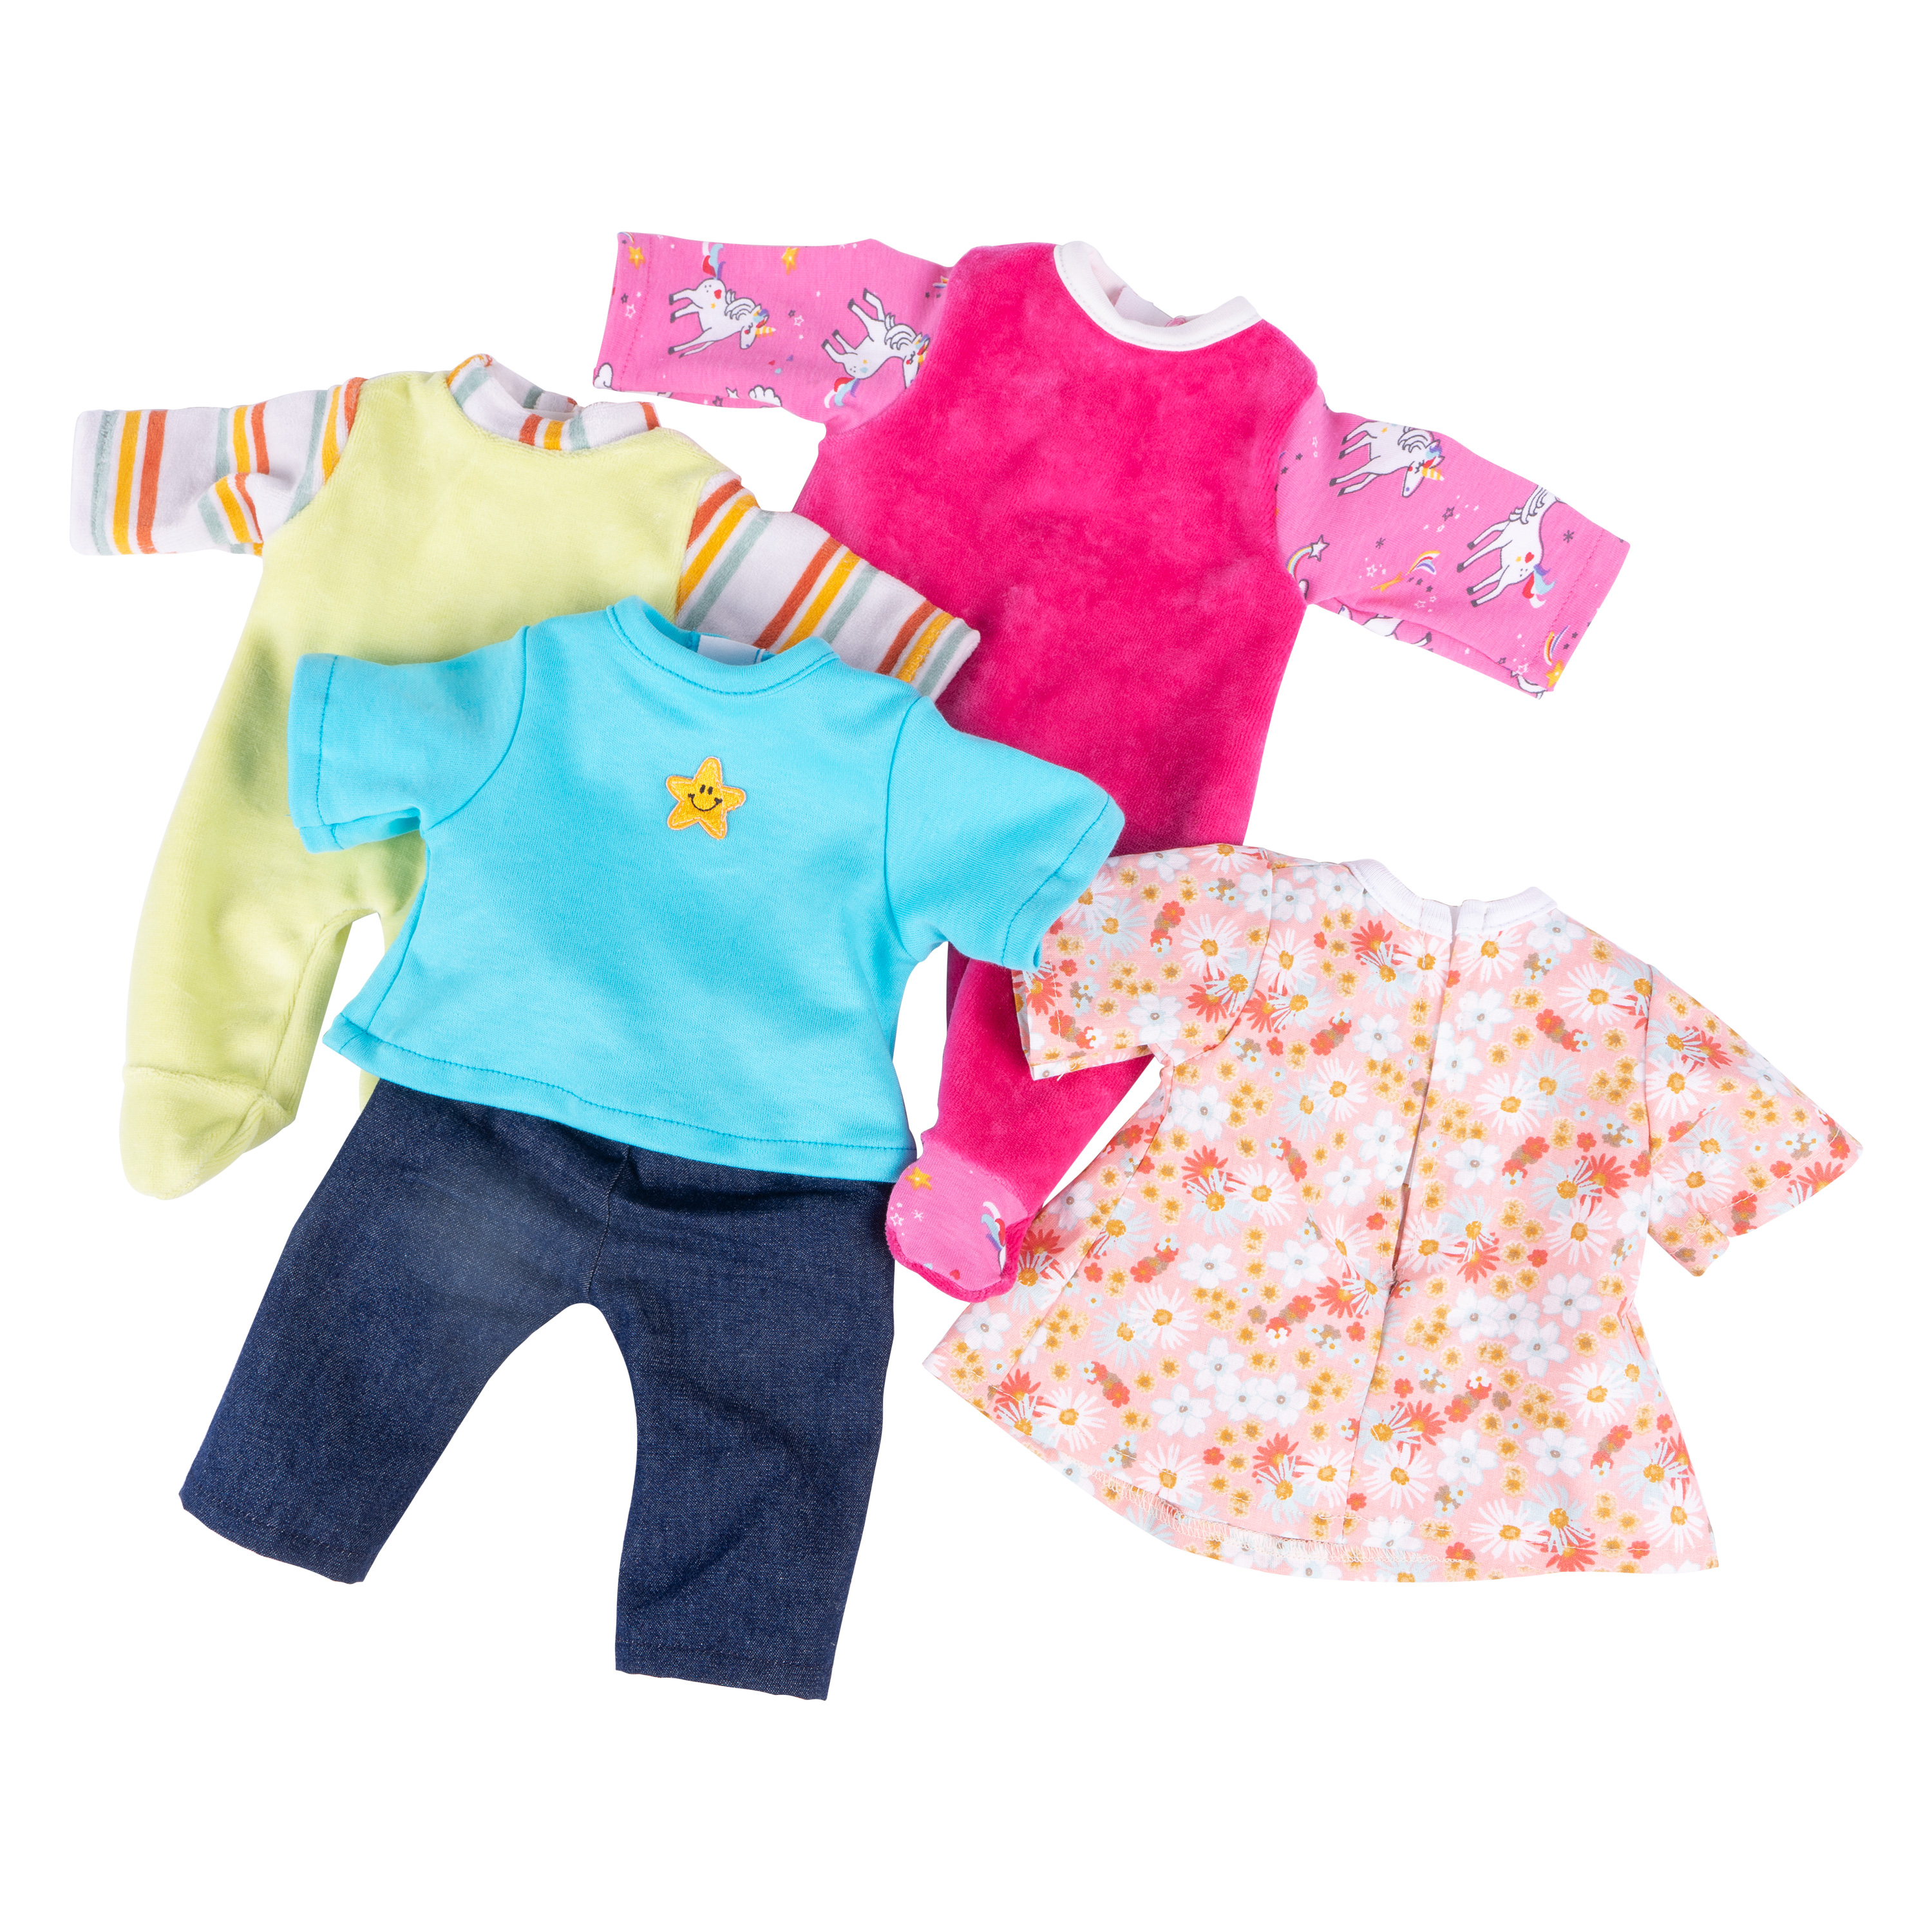 Schwenk Puppenkleidungs-Set Gr. 38, 4 Outfits